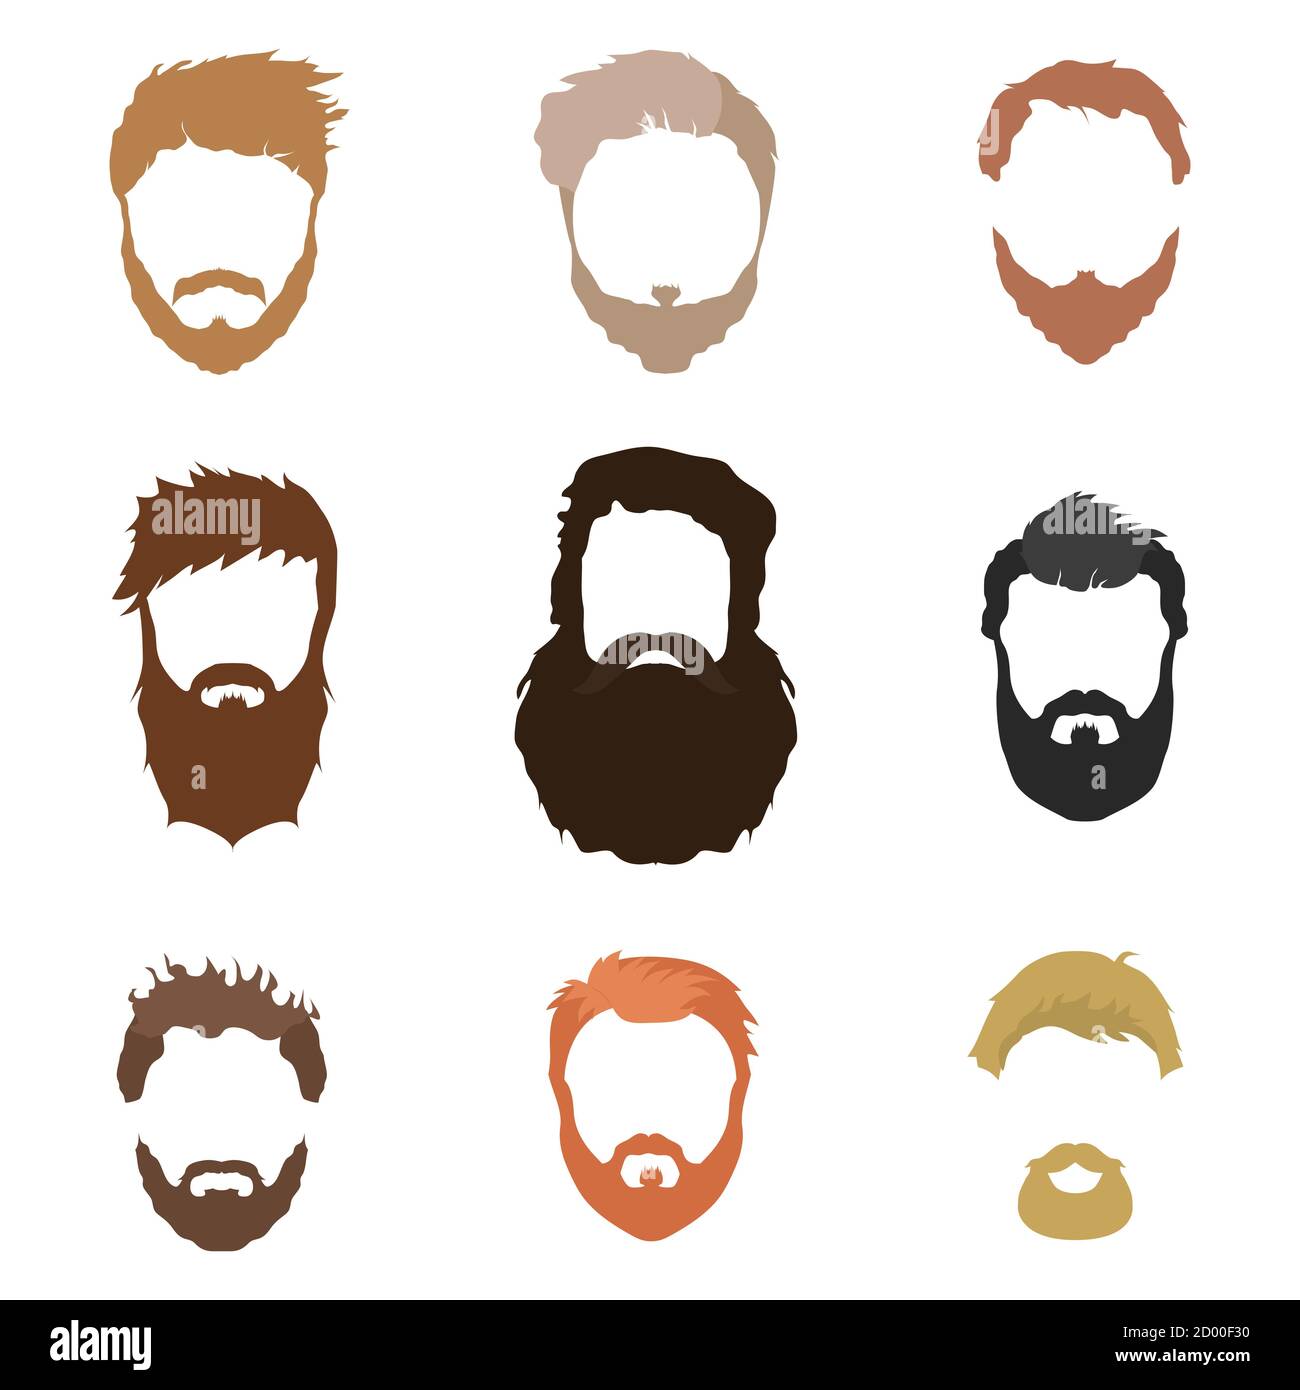 Fashionable men's hairstyle, beard, face, hair, cut-out masks Stock Vector  Image & Art - Alamy